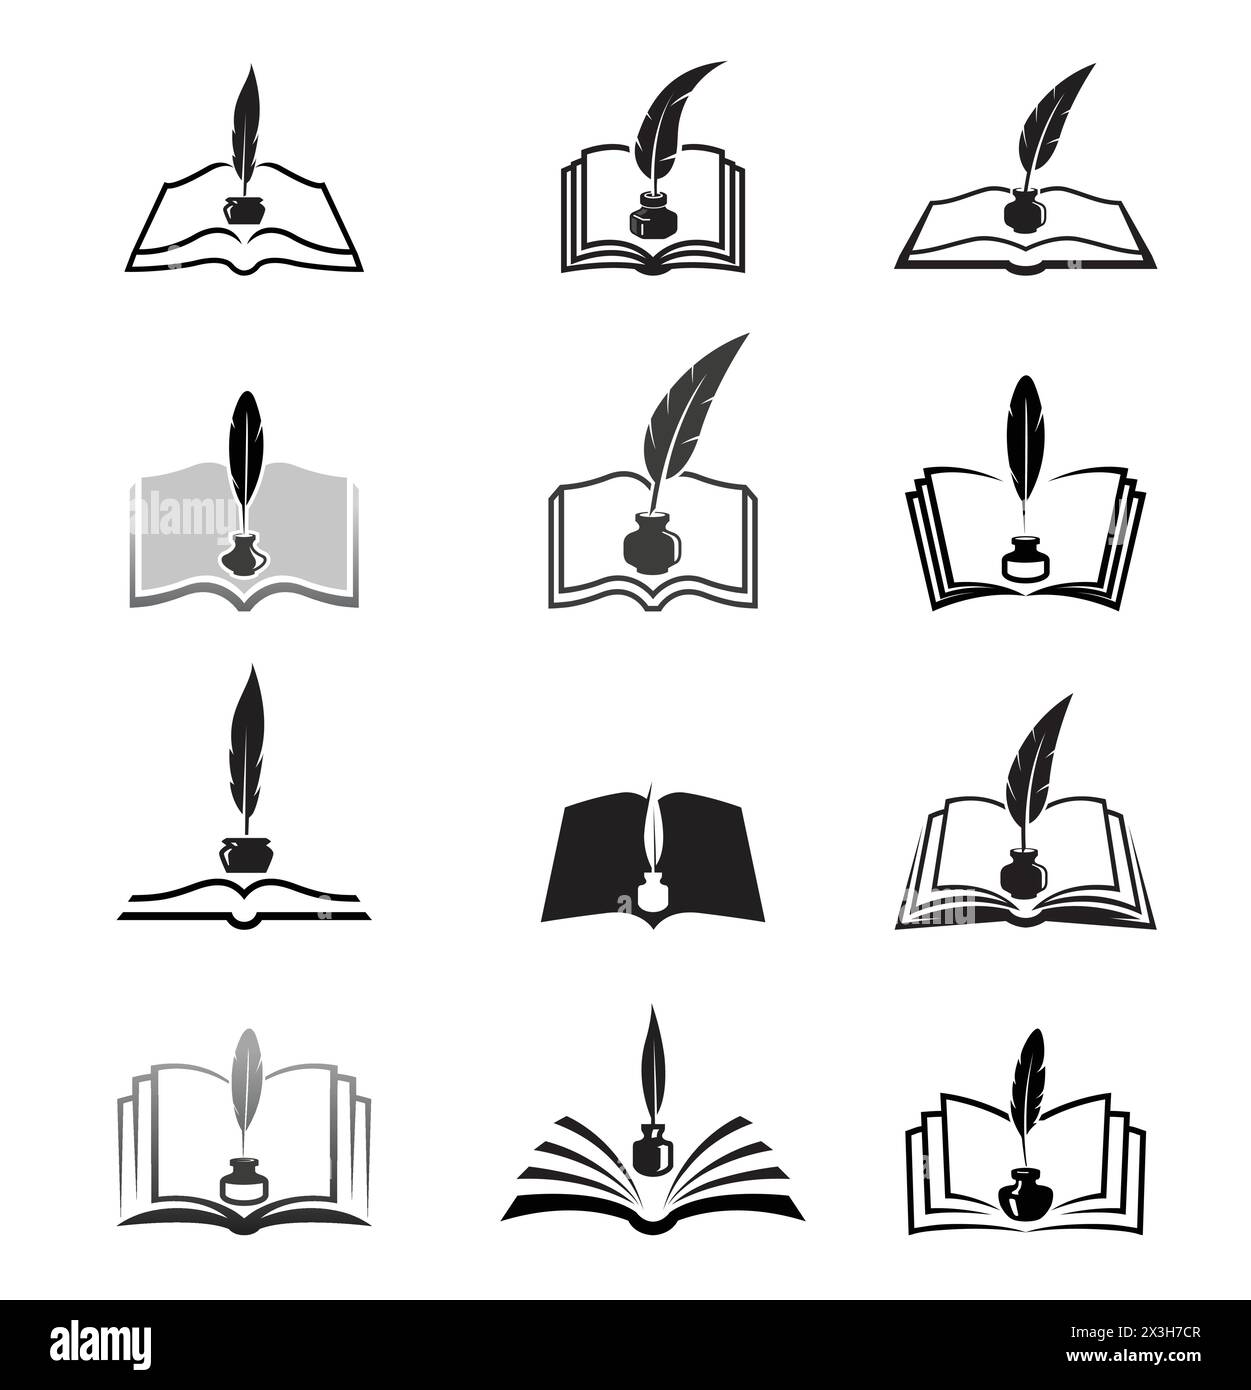 Creative Books Feathers And Ink Bottles Collection Logo Symbol Icons Design Illustration Stock Vector